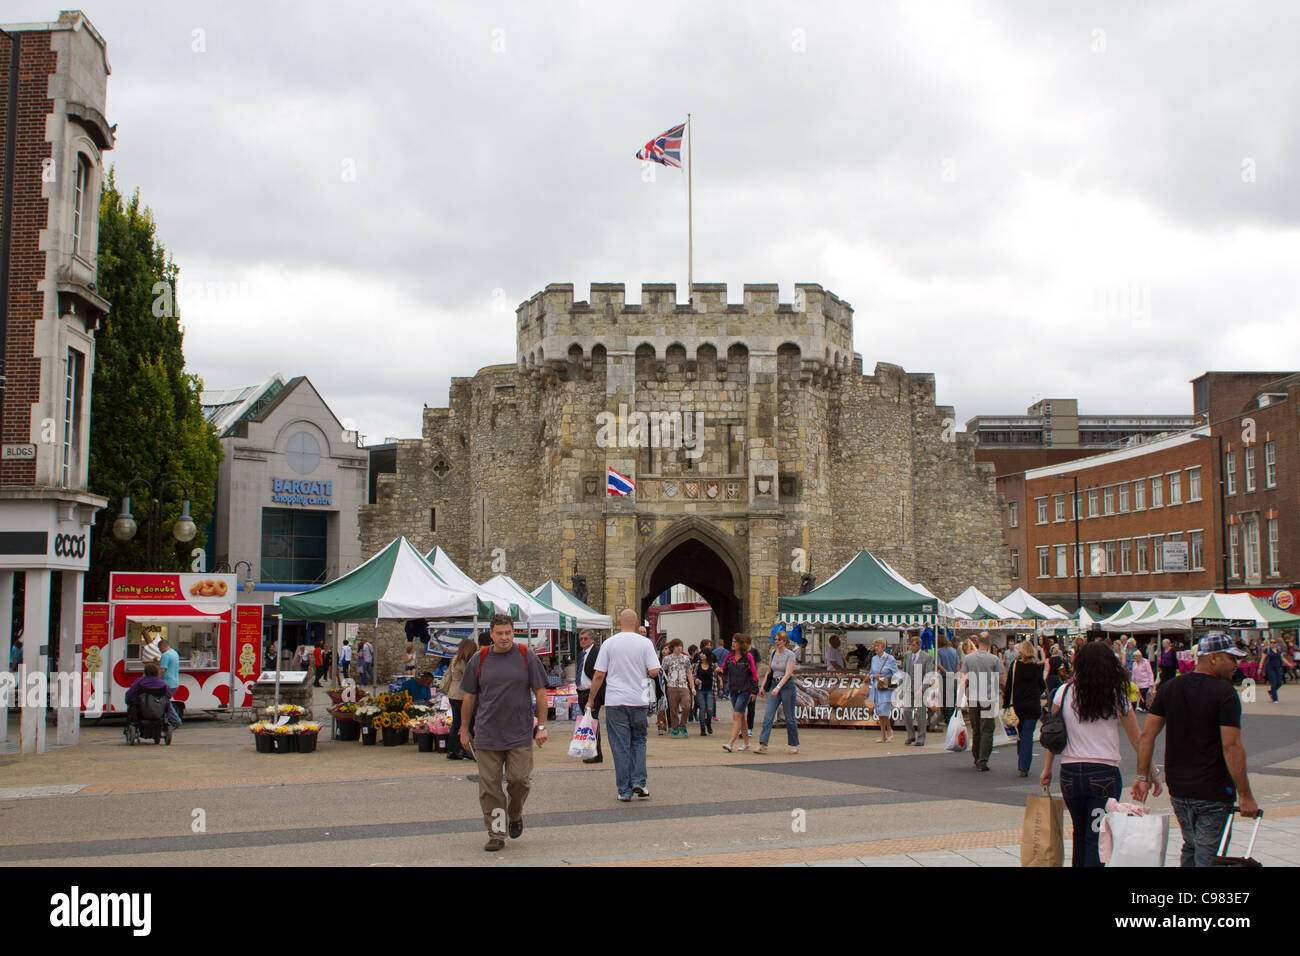 SOUTHAMPTON, UK - AUG 13: Crowd in pedestrian area of Southampton with historical Bargate in the background. Stock Photo